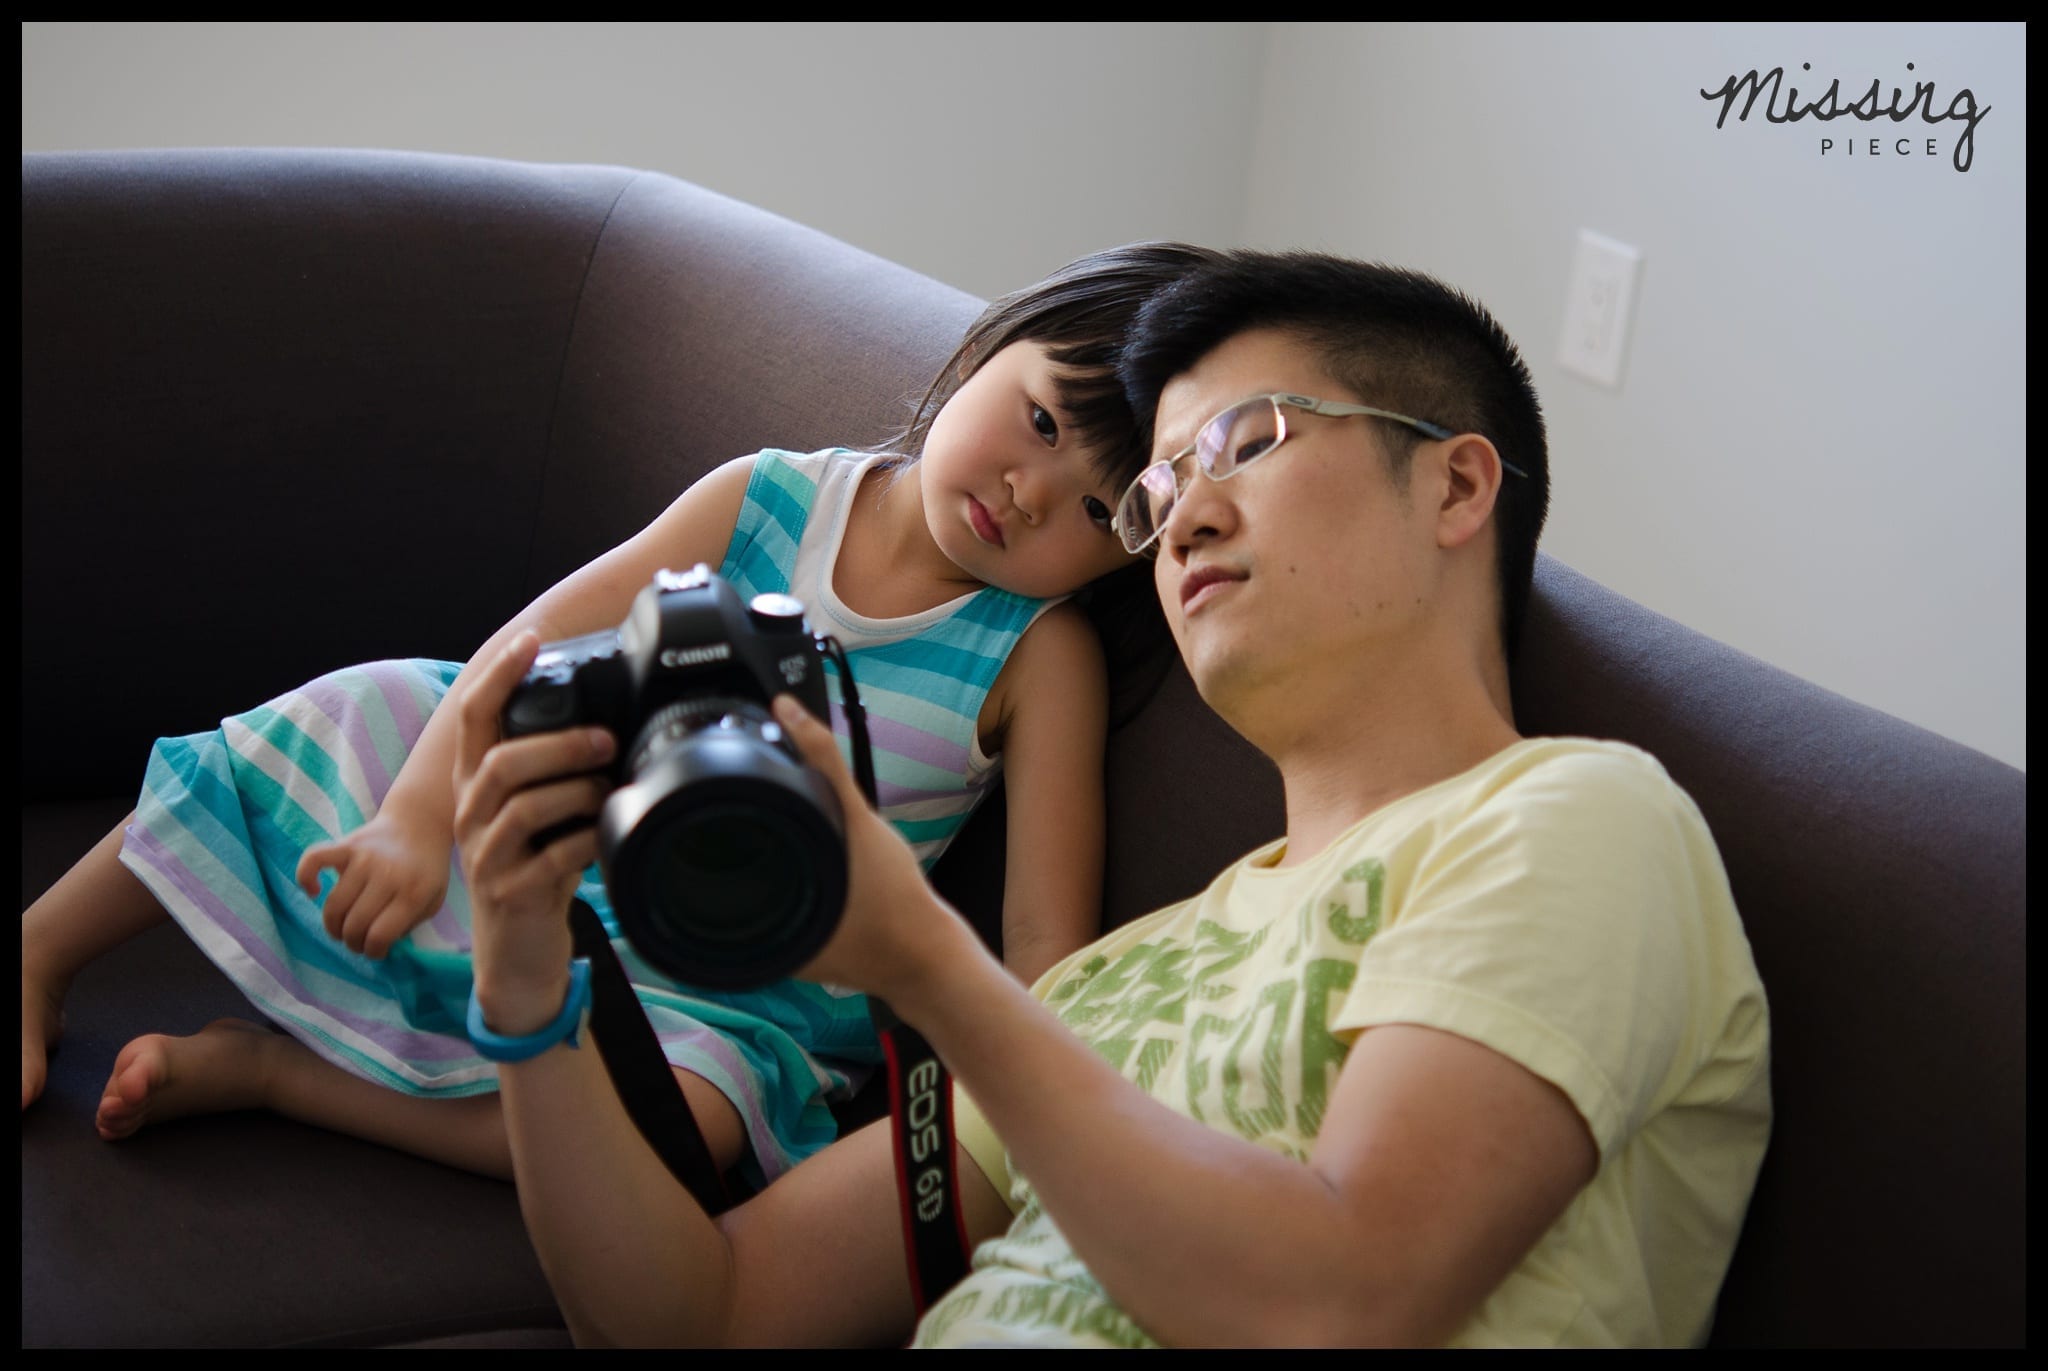 man showing him photos on his dSLR to his niece